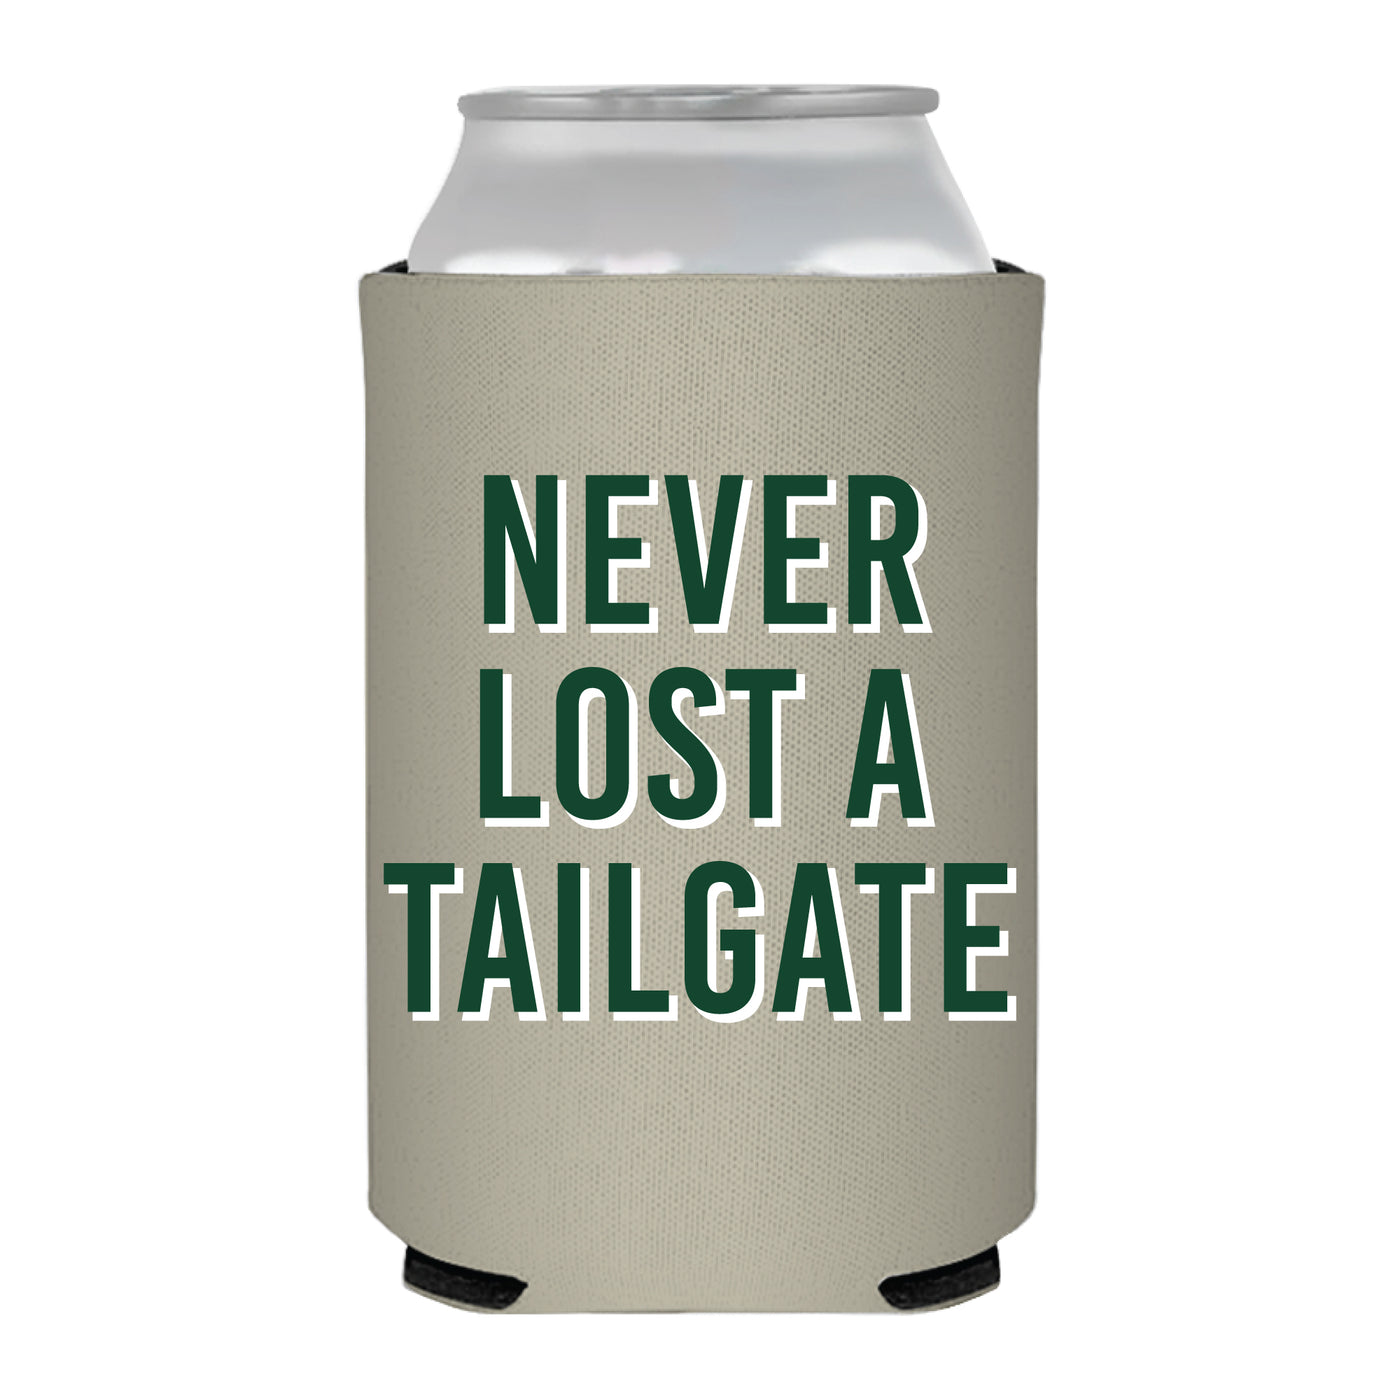 This Universal Drink Koozie is a Texas Tailgate Game Changer